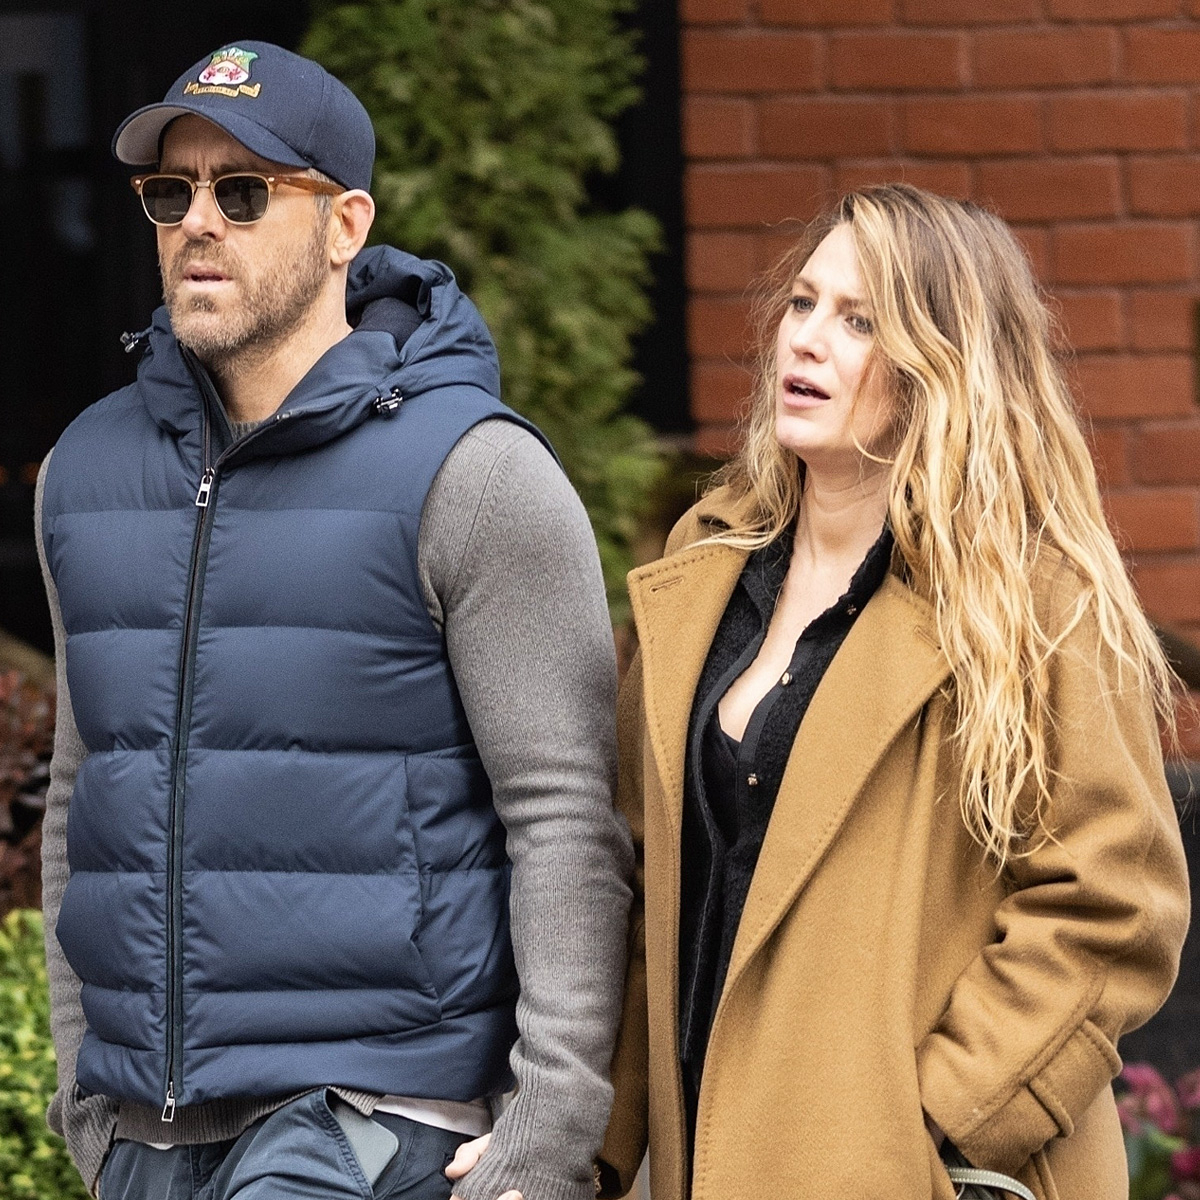 Blake Lively Steps Out With Ryan Reynolds After Welcoming Baby No. 4 - E! NEWS